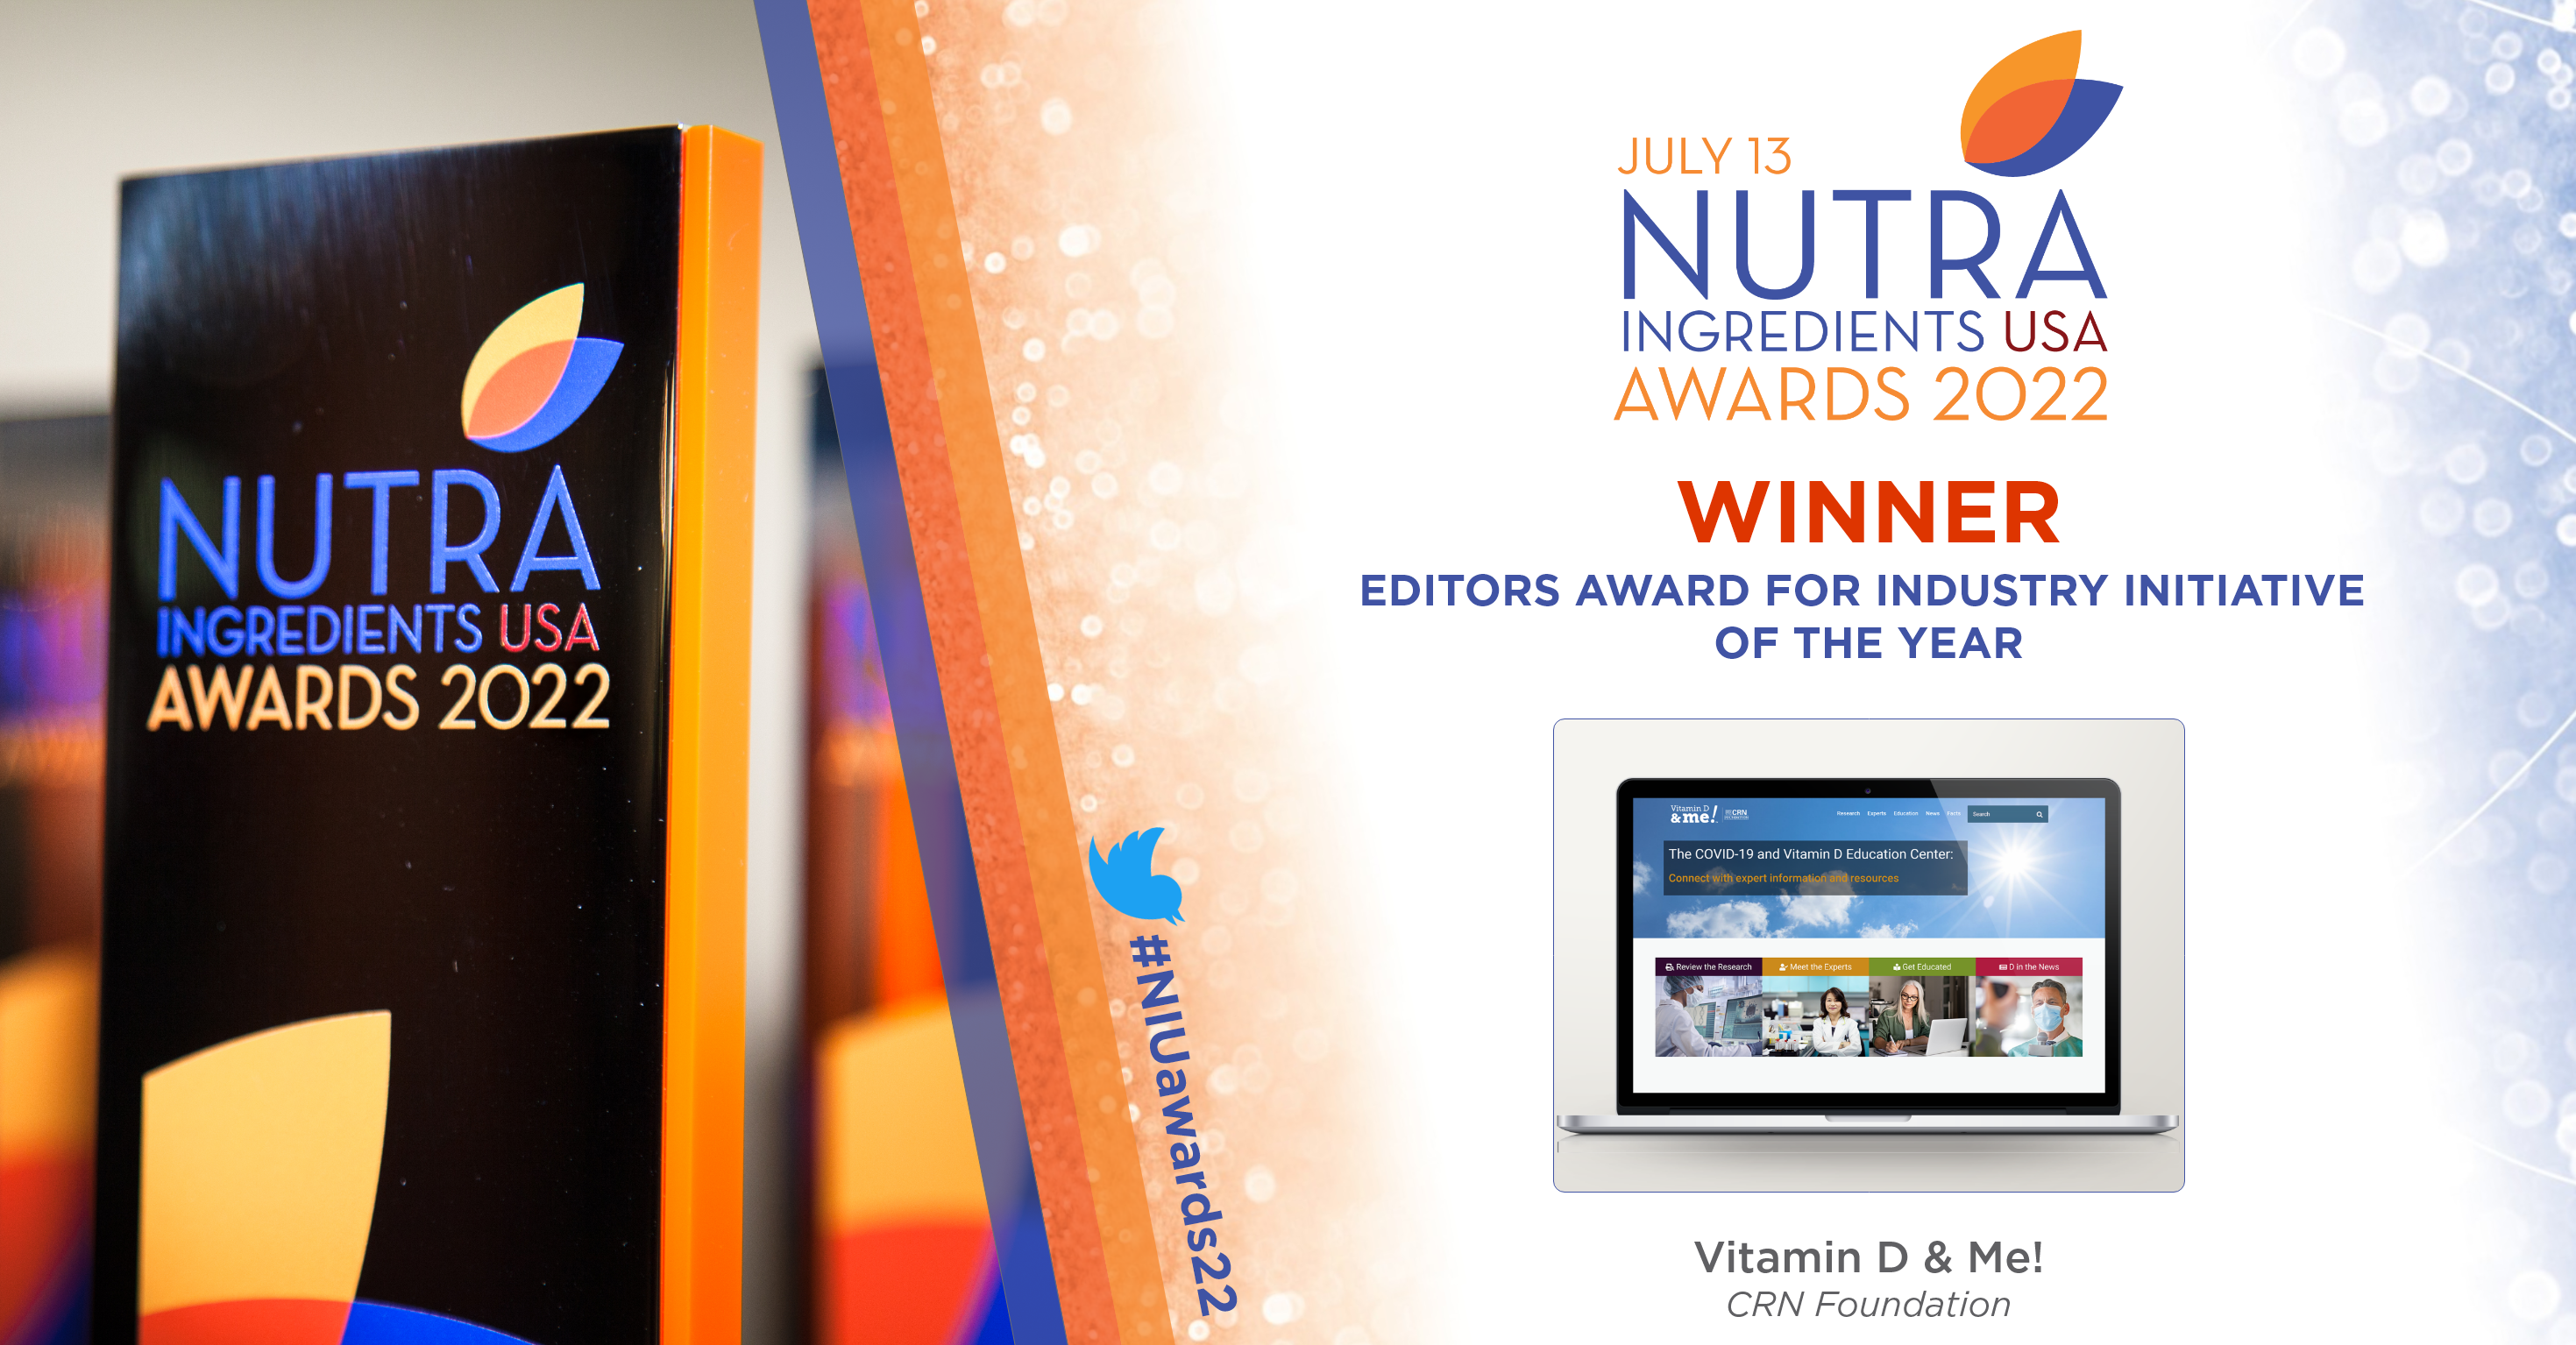 Vitamin D & Me!™ Receives NutraIngredients-USA “Industry Initiative of the Year” Award – Nutrasource Acknowledged as Key Scientific Partner